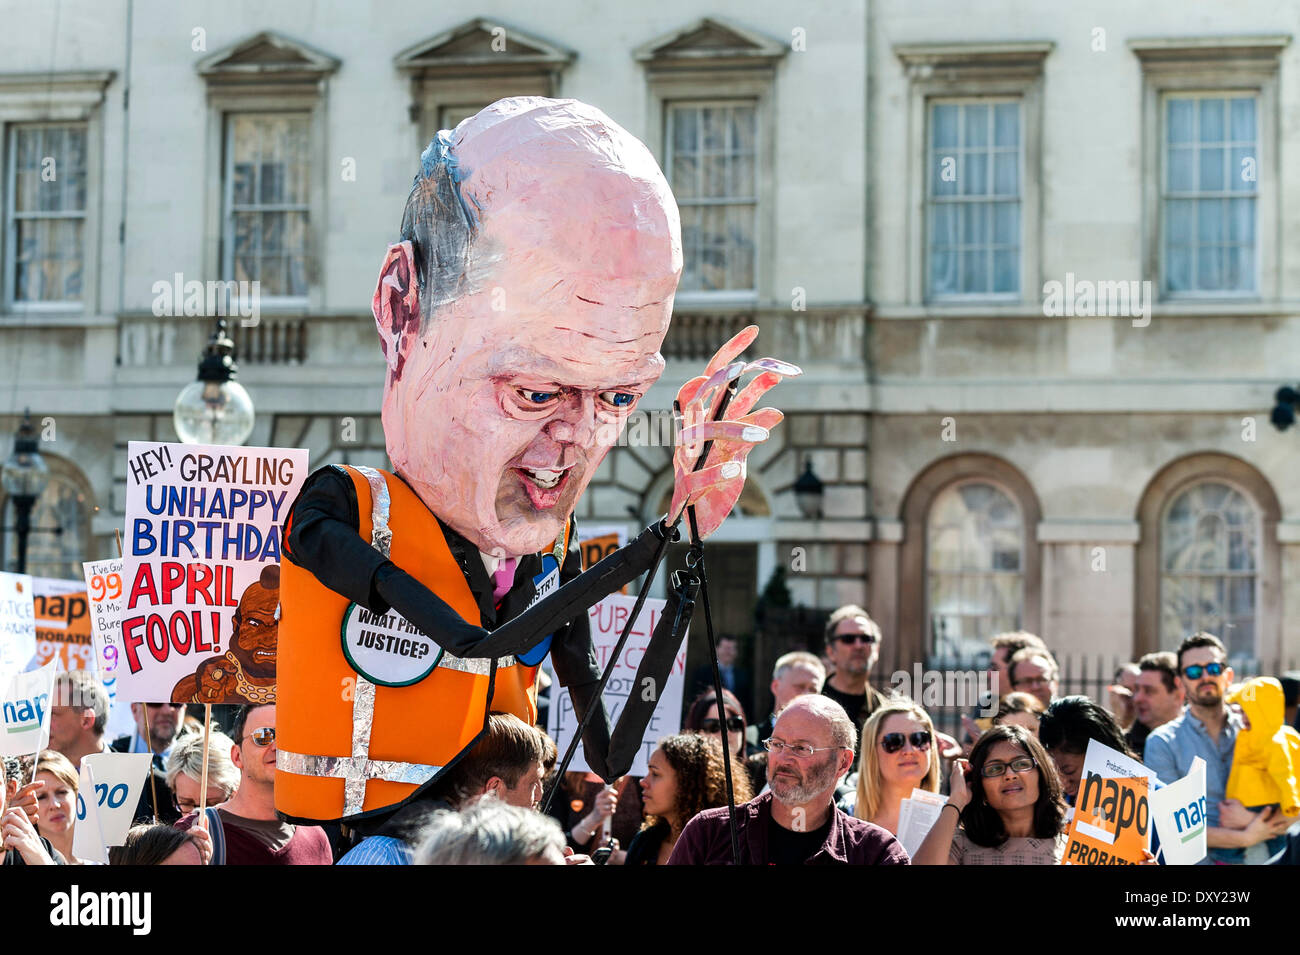 London, UK. 1st April 2014.  A large effigy of Chris Grayling, the Justice Secretary, joins the massed protesters as part of the joint demonstration by probation officers and legal aid solicitors. Photographer: Gordon Scammell/Alamy Live News Stock Photo